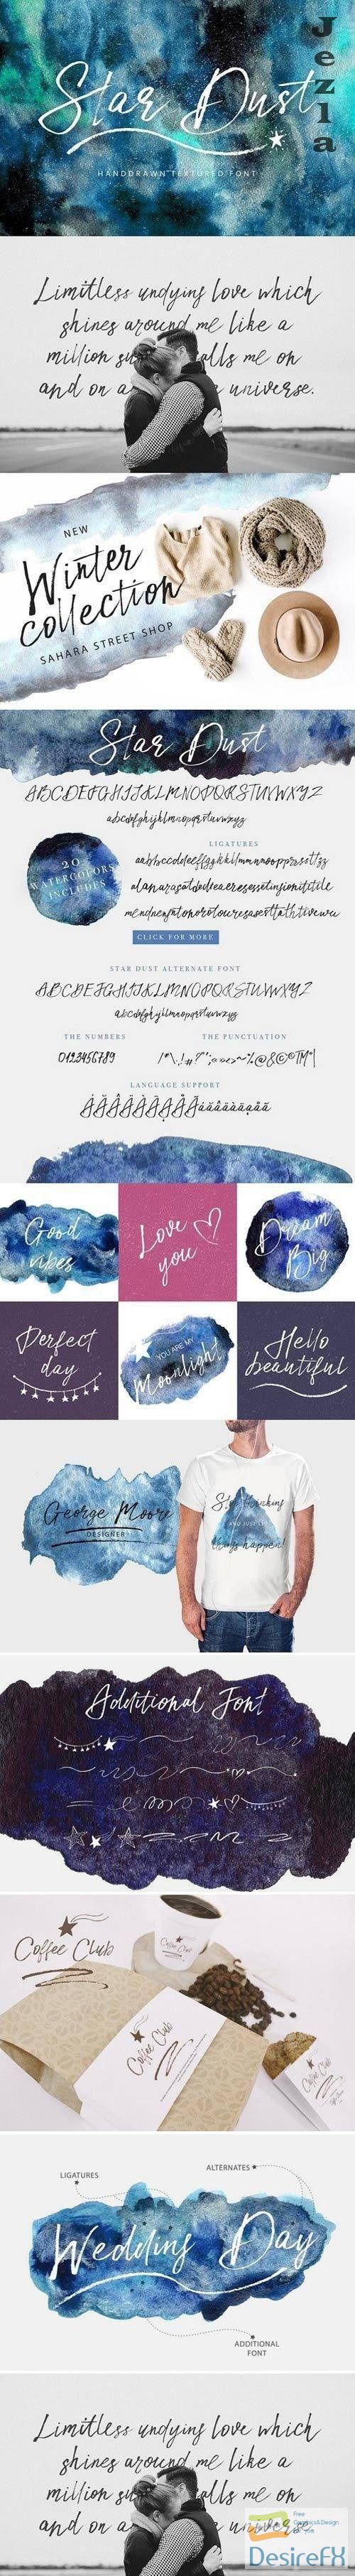 Star Dust Font &amp; watercolor textures  - 2005572